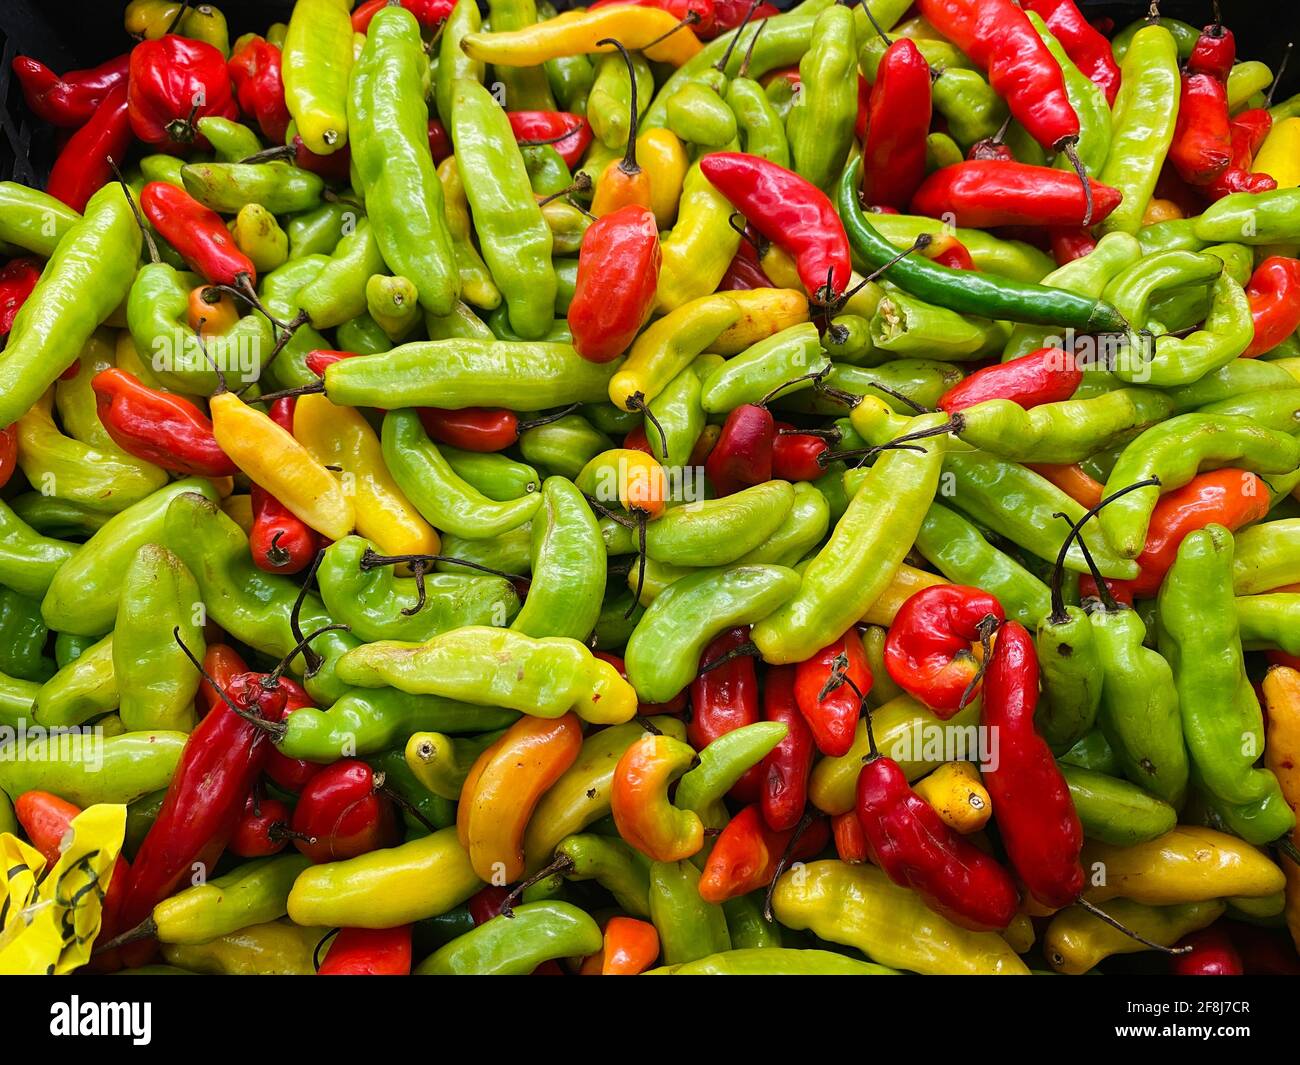 Colourful mix of red and green chilli peppers used in preparing hot spicy food Stock Photo